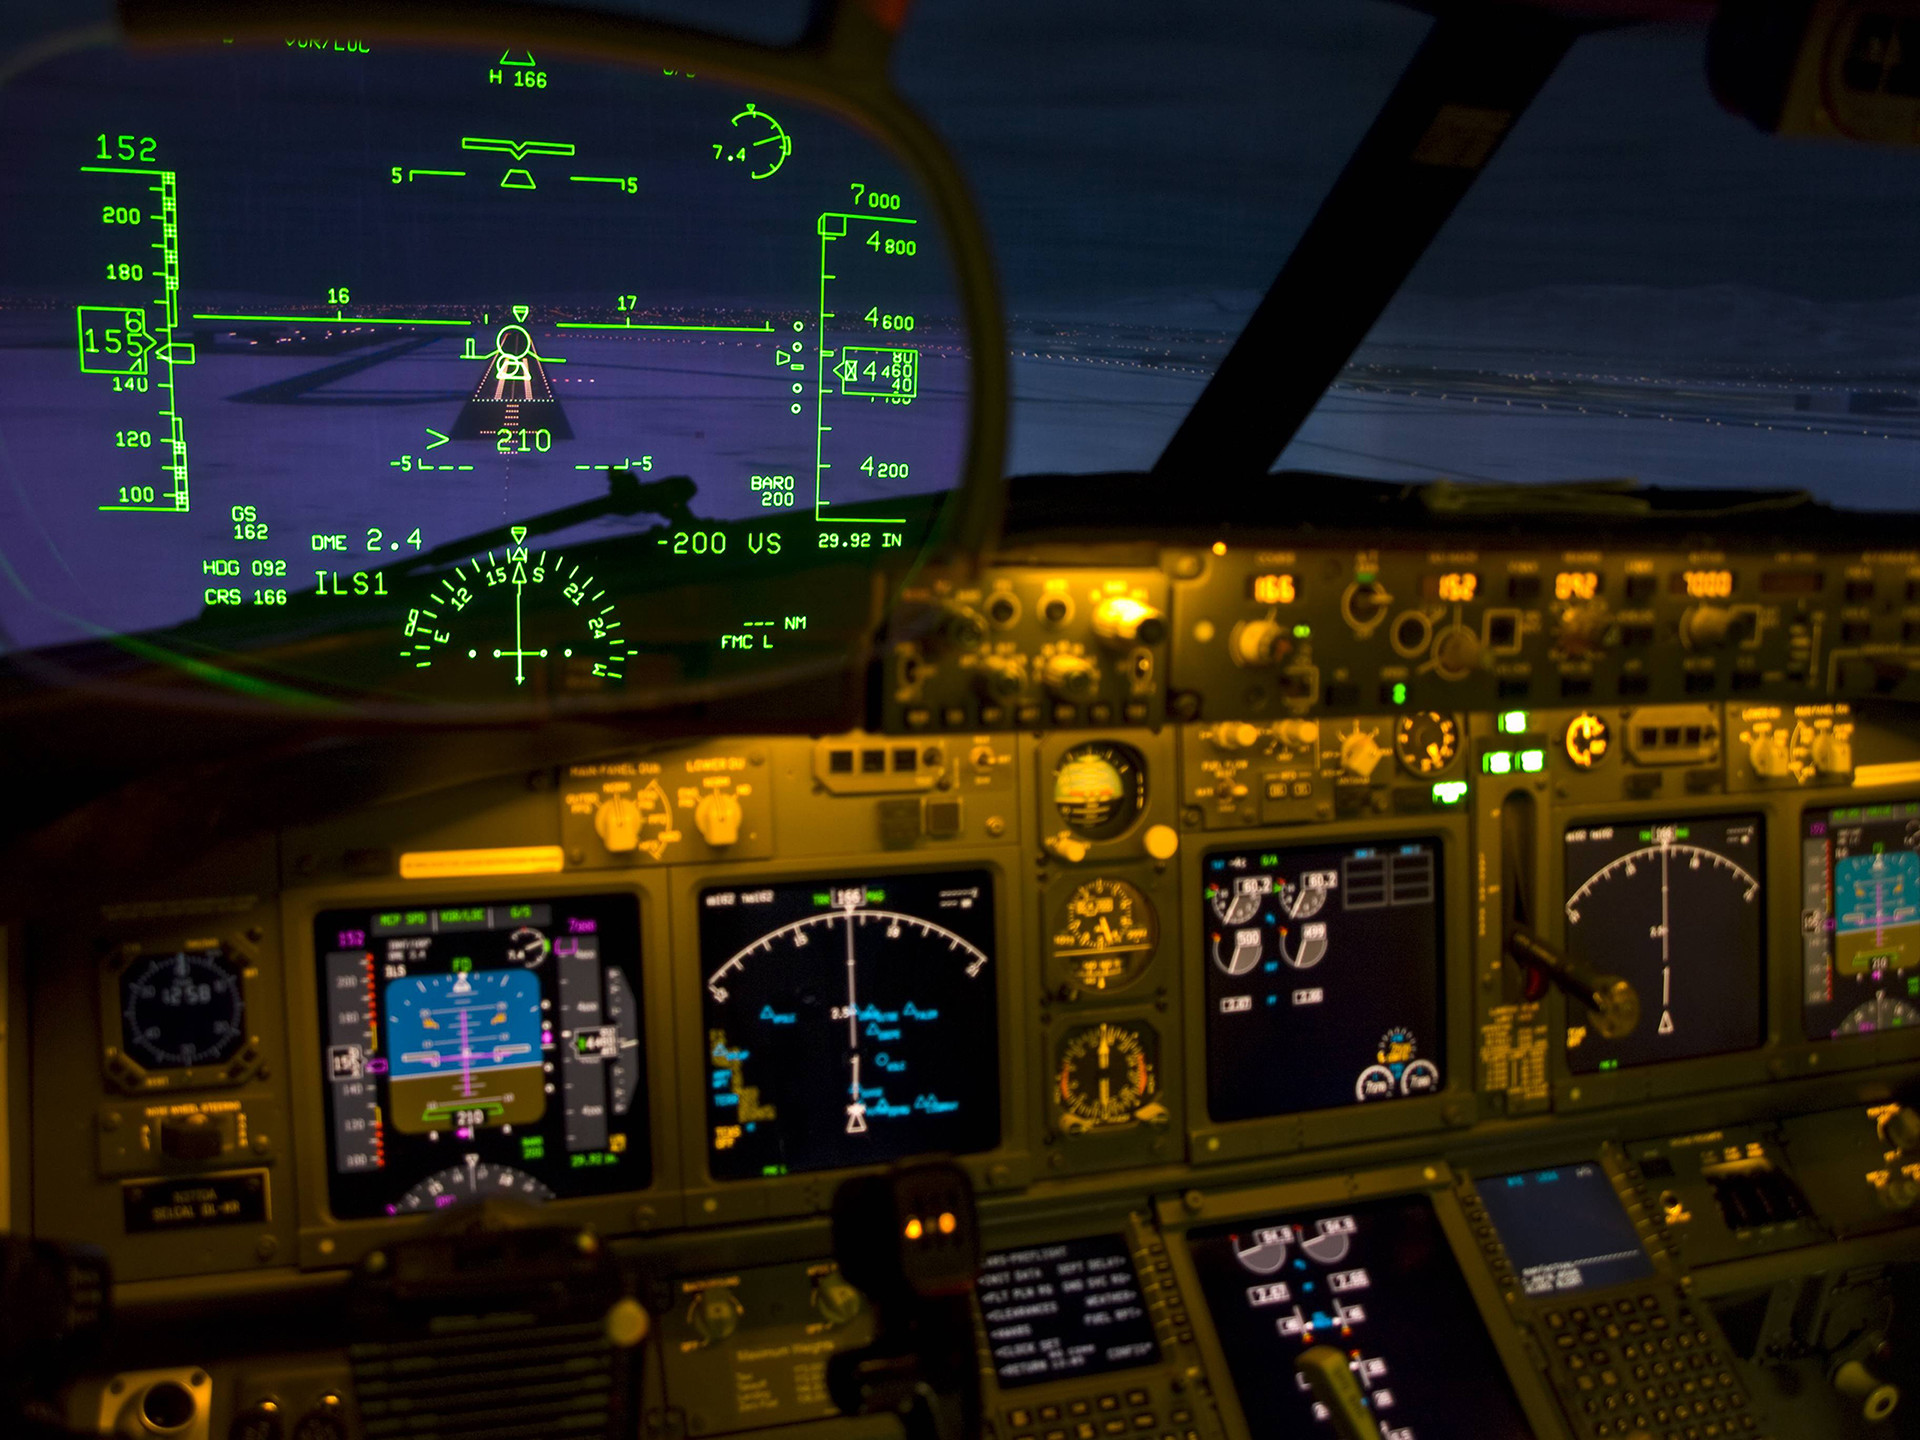 1920x1440 Heads-Up Display Cockpit airplane military wallpaper background